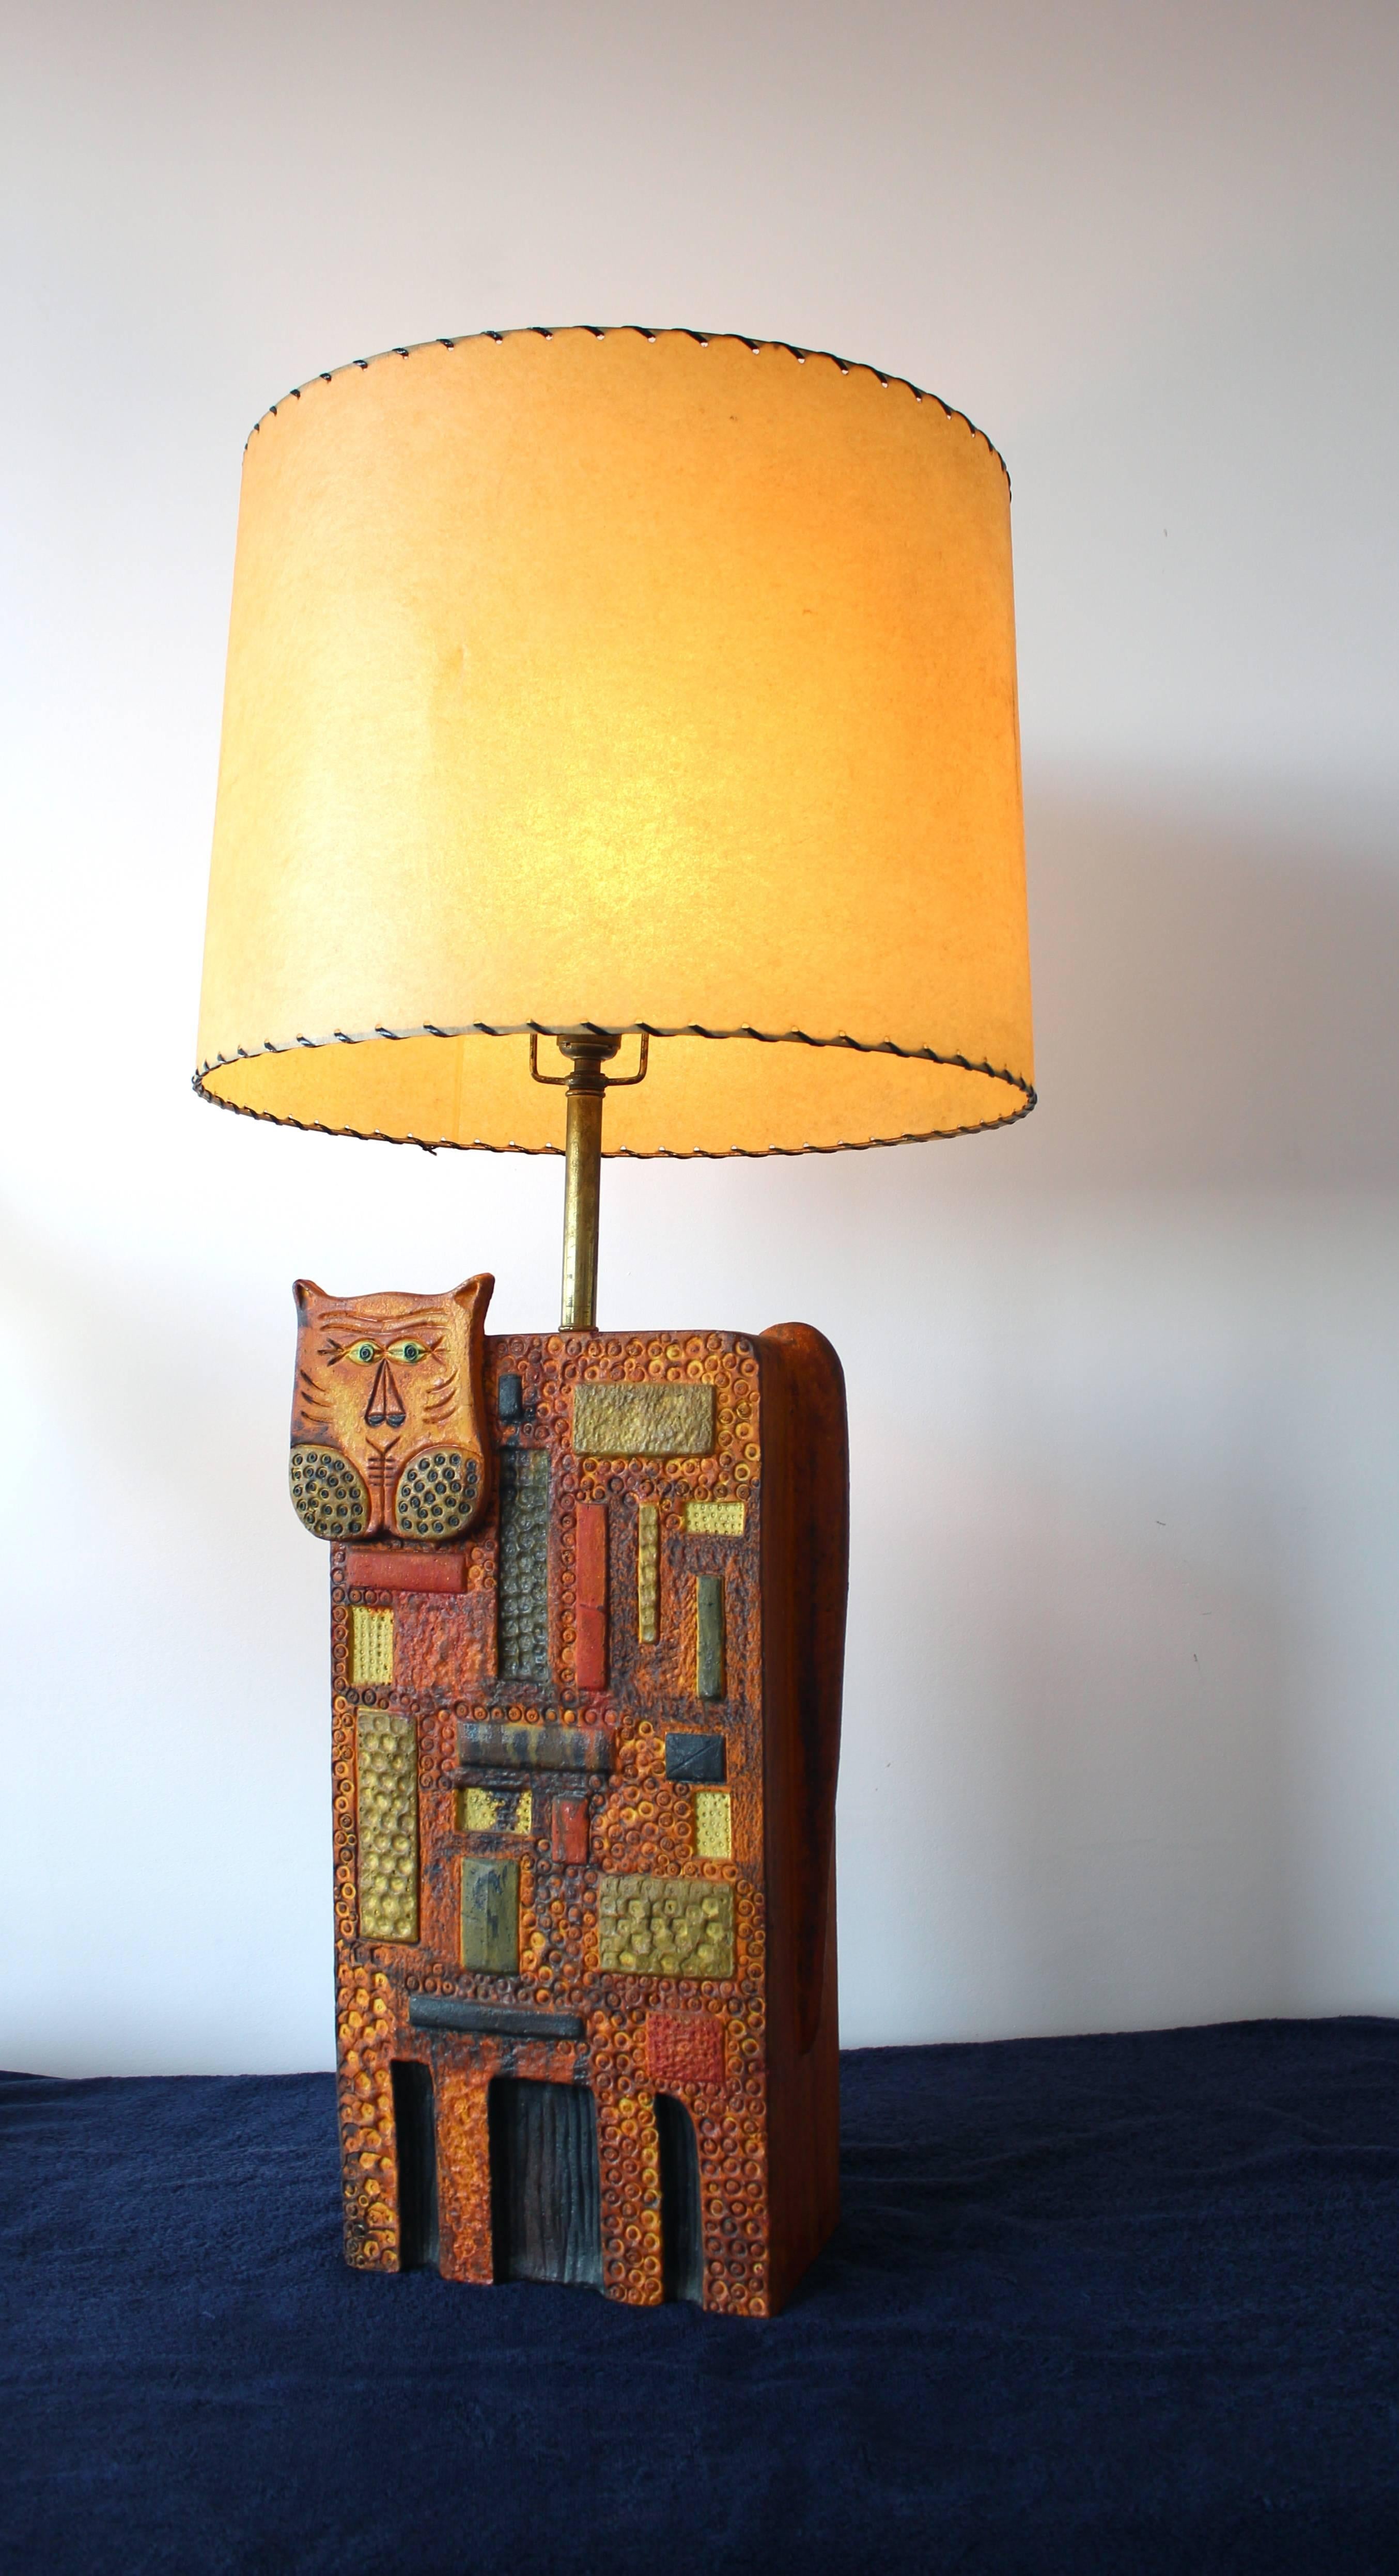 Very large ceramic lamp form with applied cat head by Marcello Fantoni, Italian, 1960.

Sold without shade.

Dimensions:
Lamp body height: 21 inchs.
Height shade included: 38 inchs.